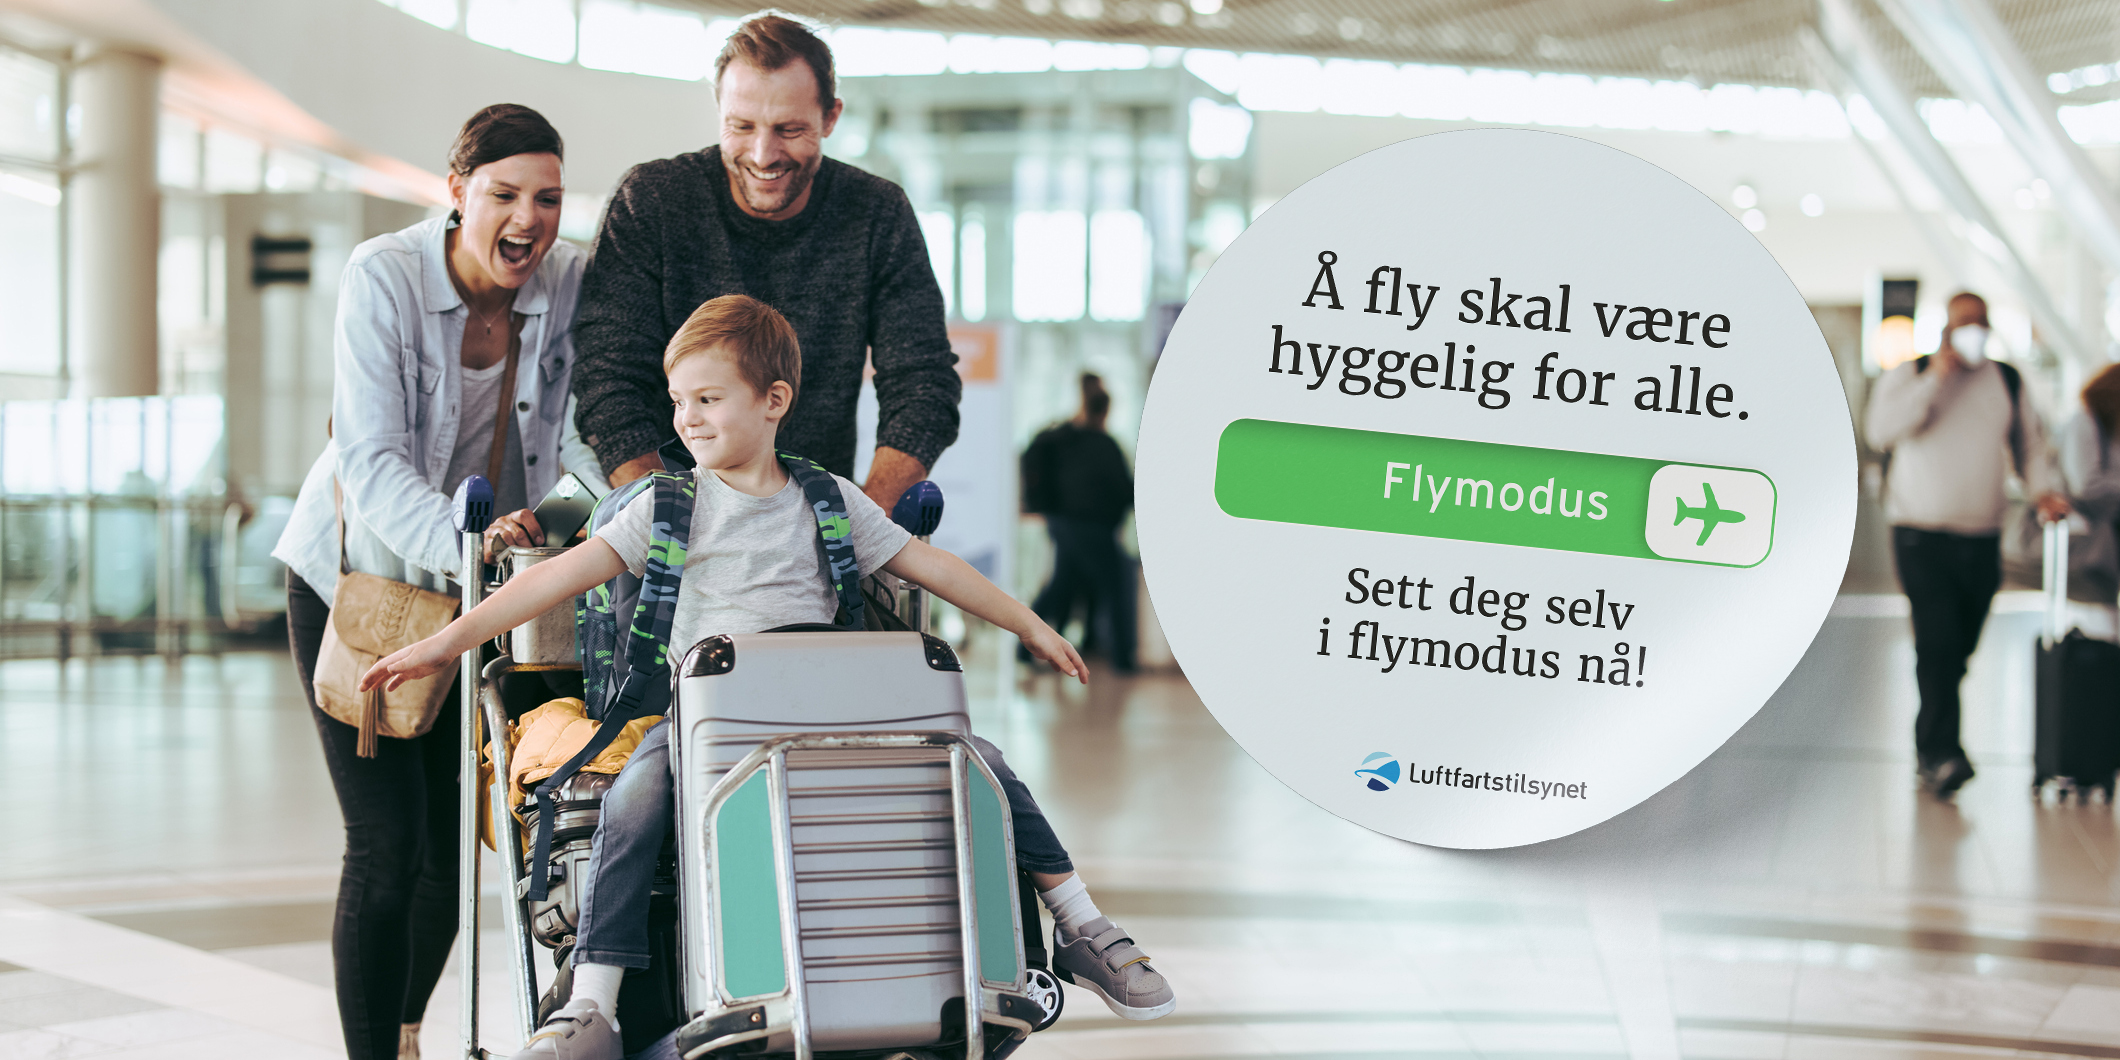 A joyful family shares a moment of happiness at the airport, with their son seated on the luggage beaming a wide smile. In the background, a campaign by the Norwegian Civil Aviation Authority encourages setting electronic devices to airplane mode for a pleasant flying experience for everyone.